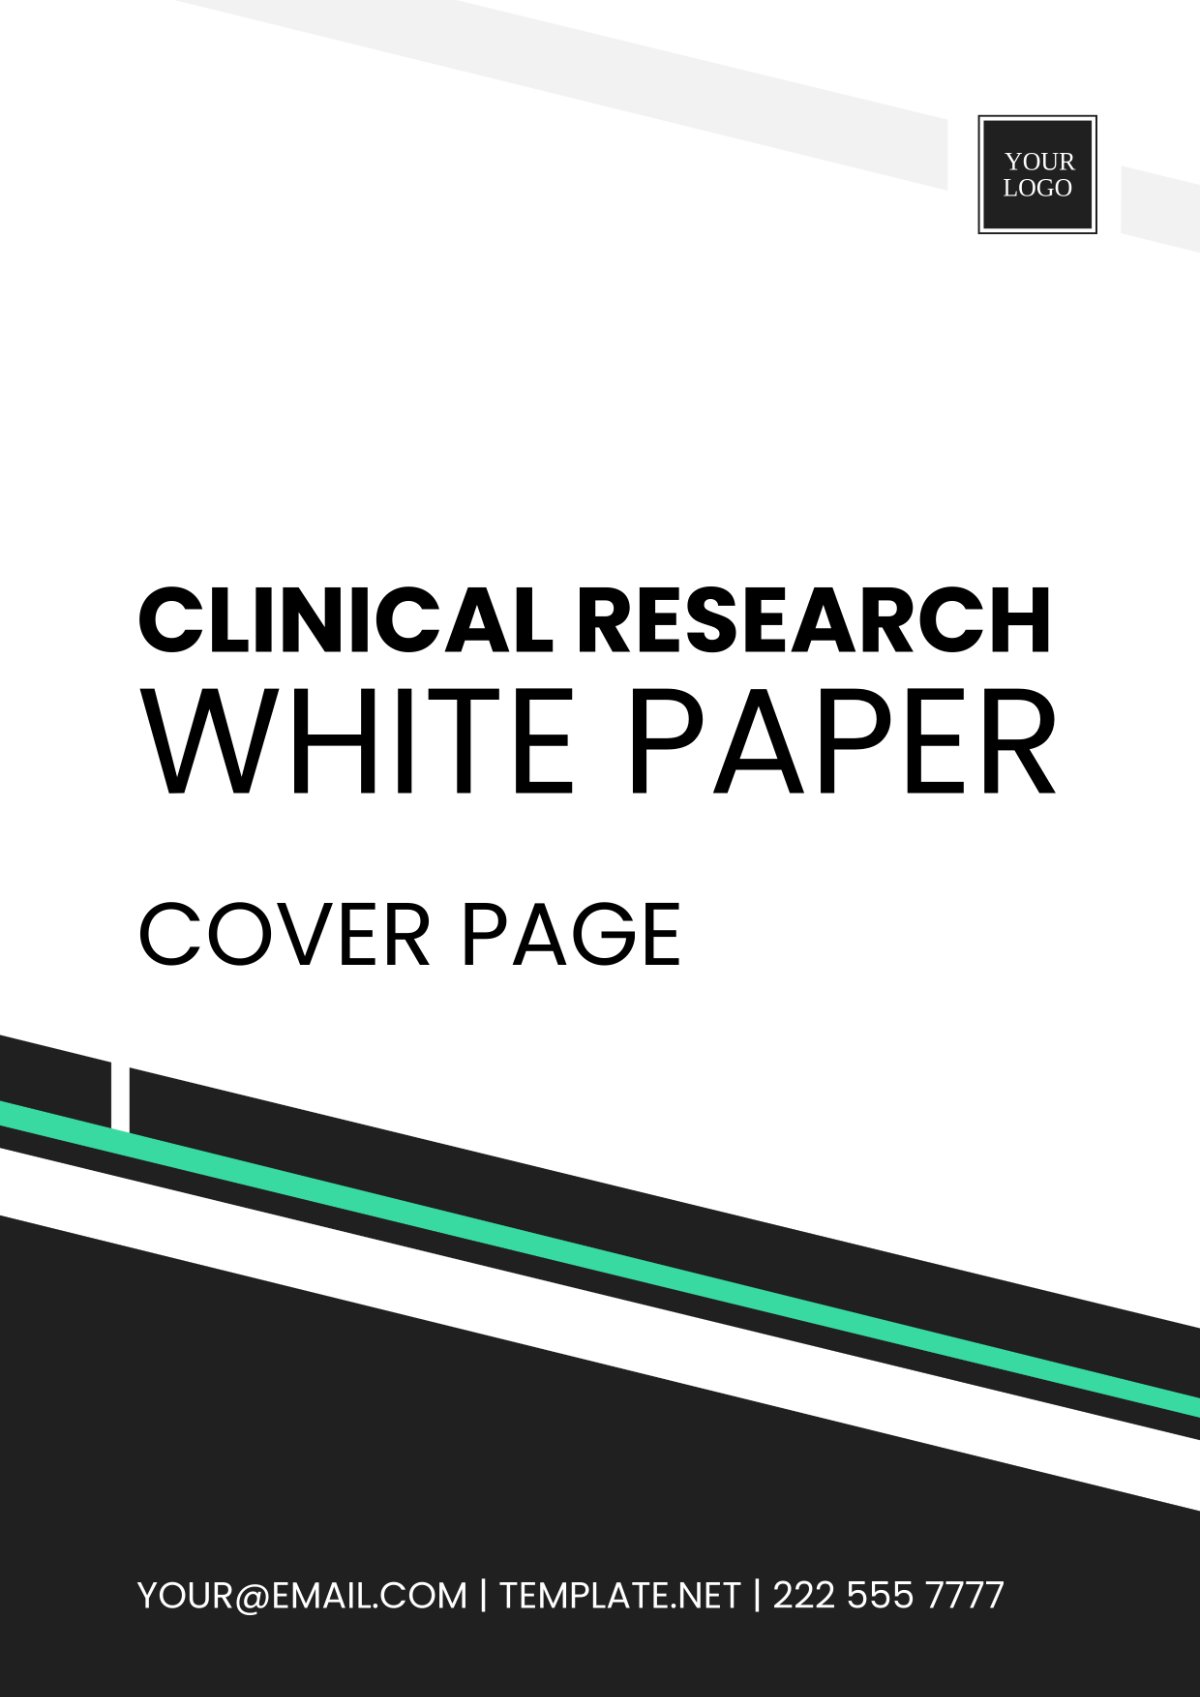 Clinical Research White Paper Cover Page